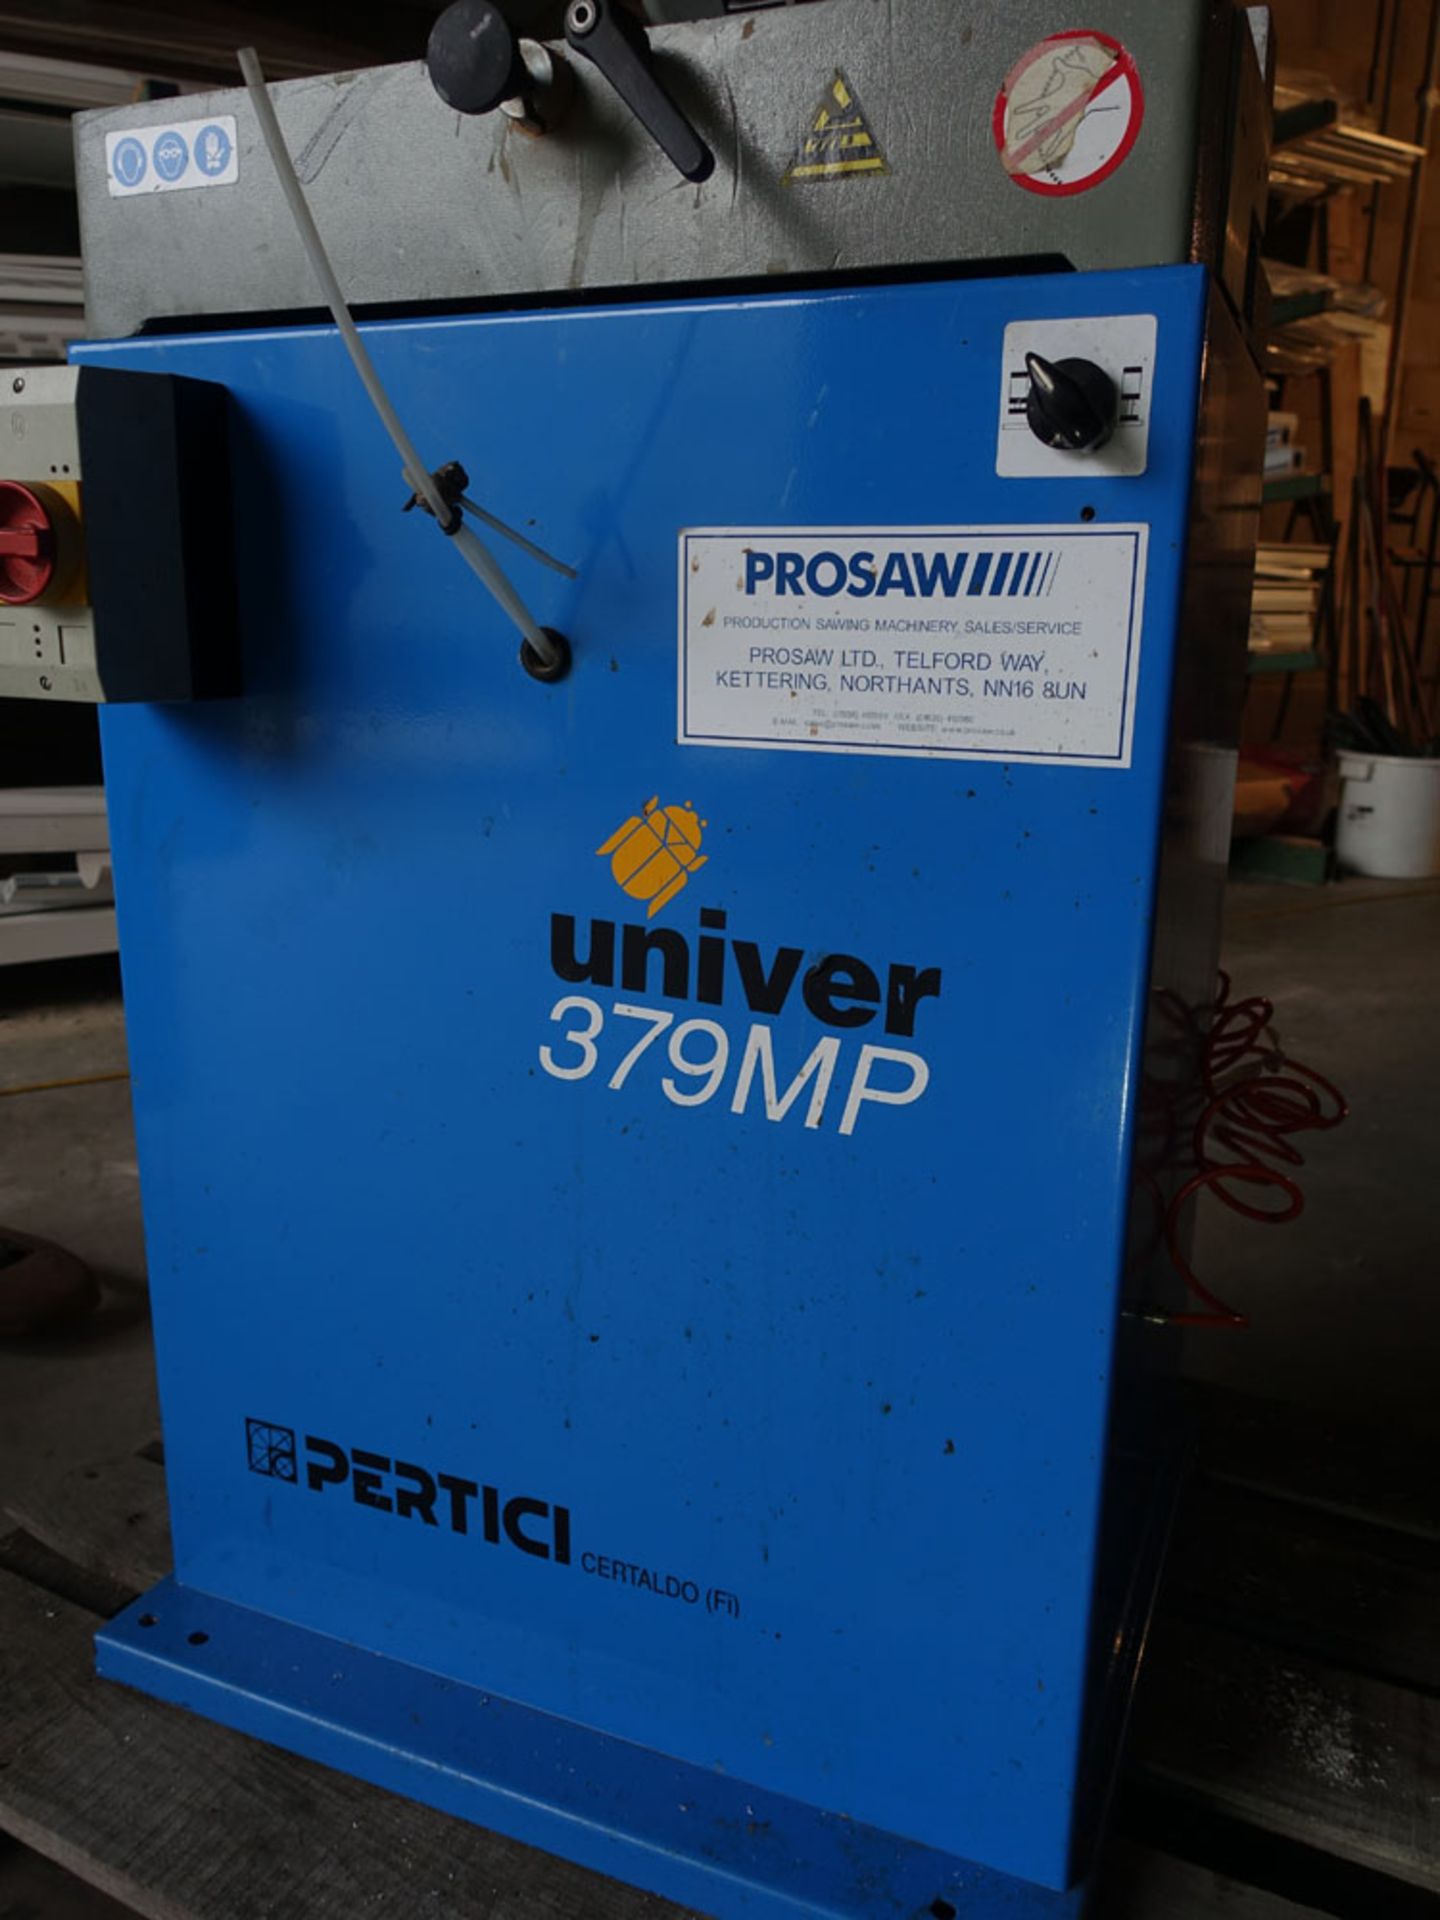 Pertici Univer model 379MP cut off saw Serial number 00S141 Year 2000 - Image 7 of 7